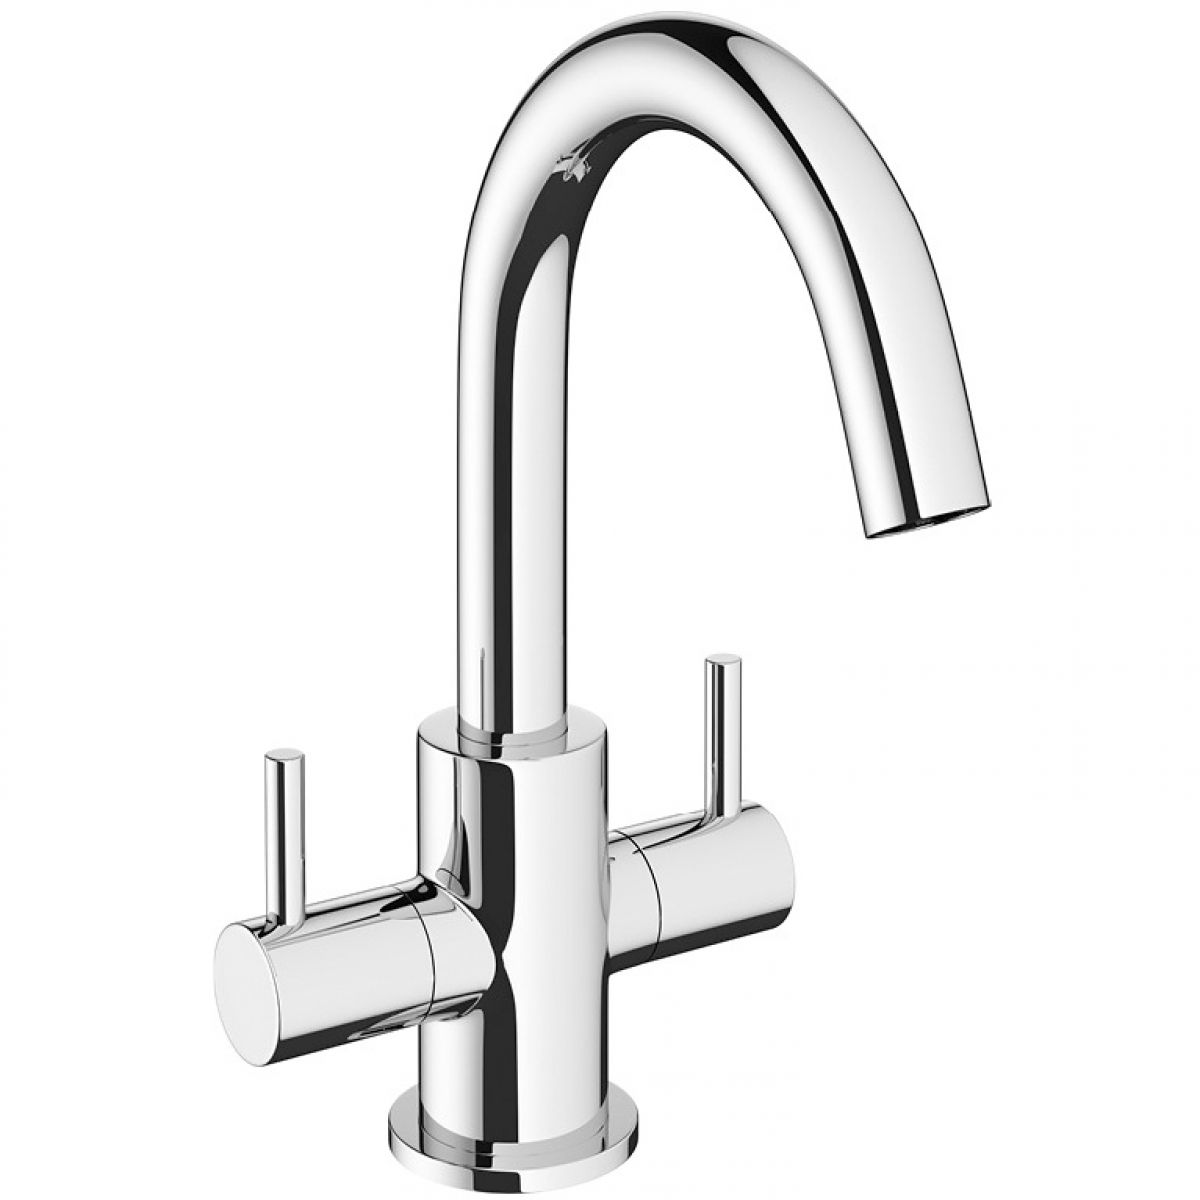 Crosswater MPRO Chrome Twin Lever Basin Mixer Tap